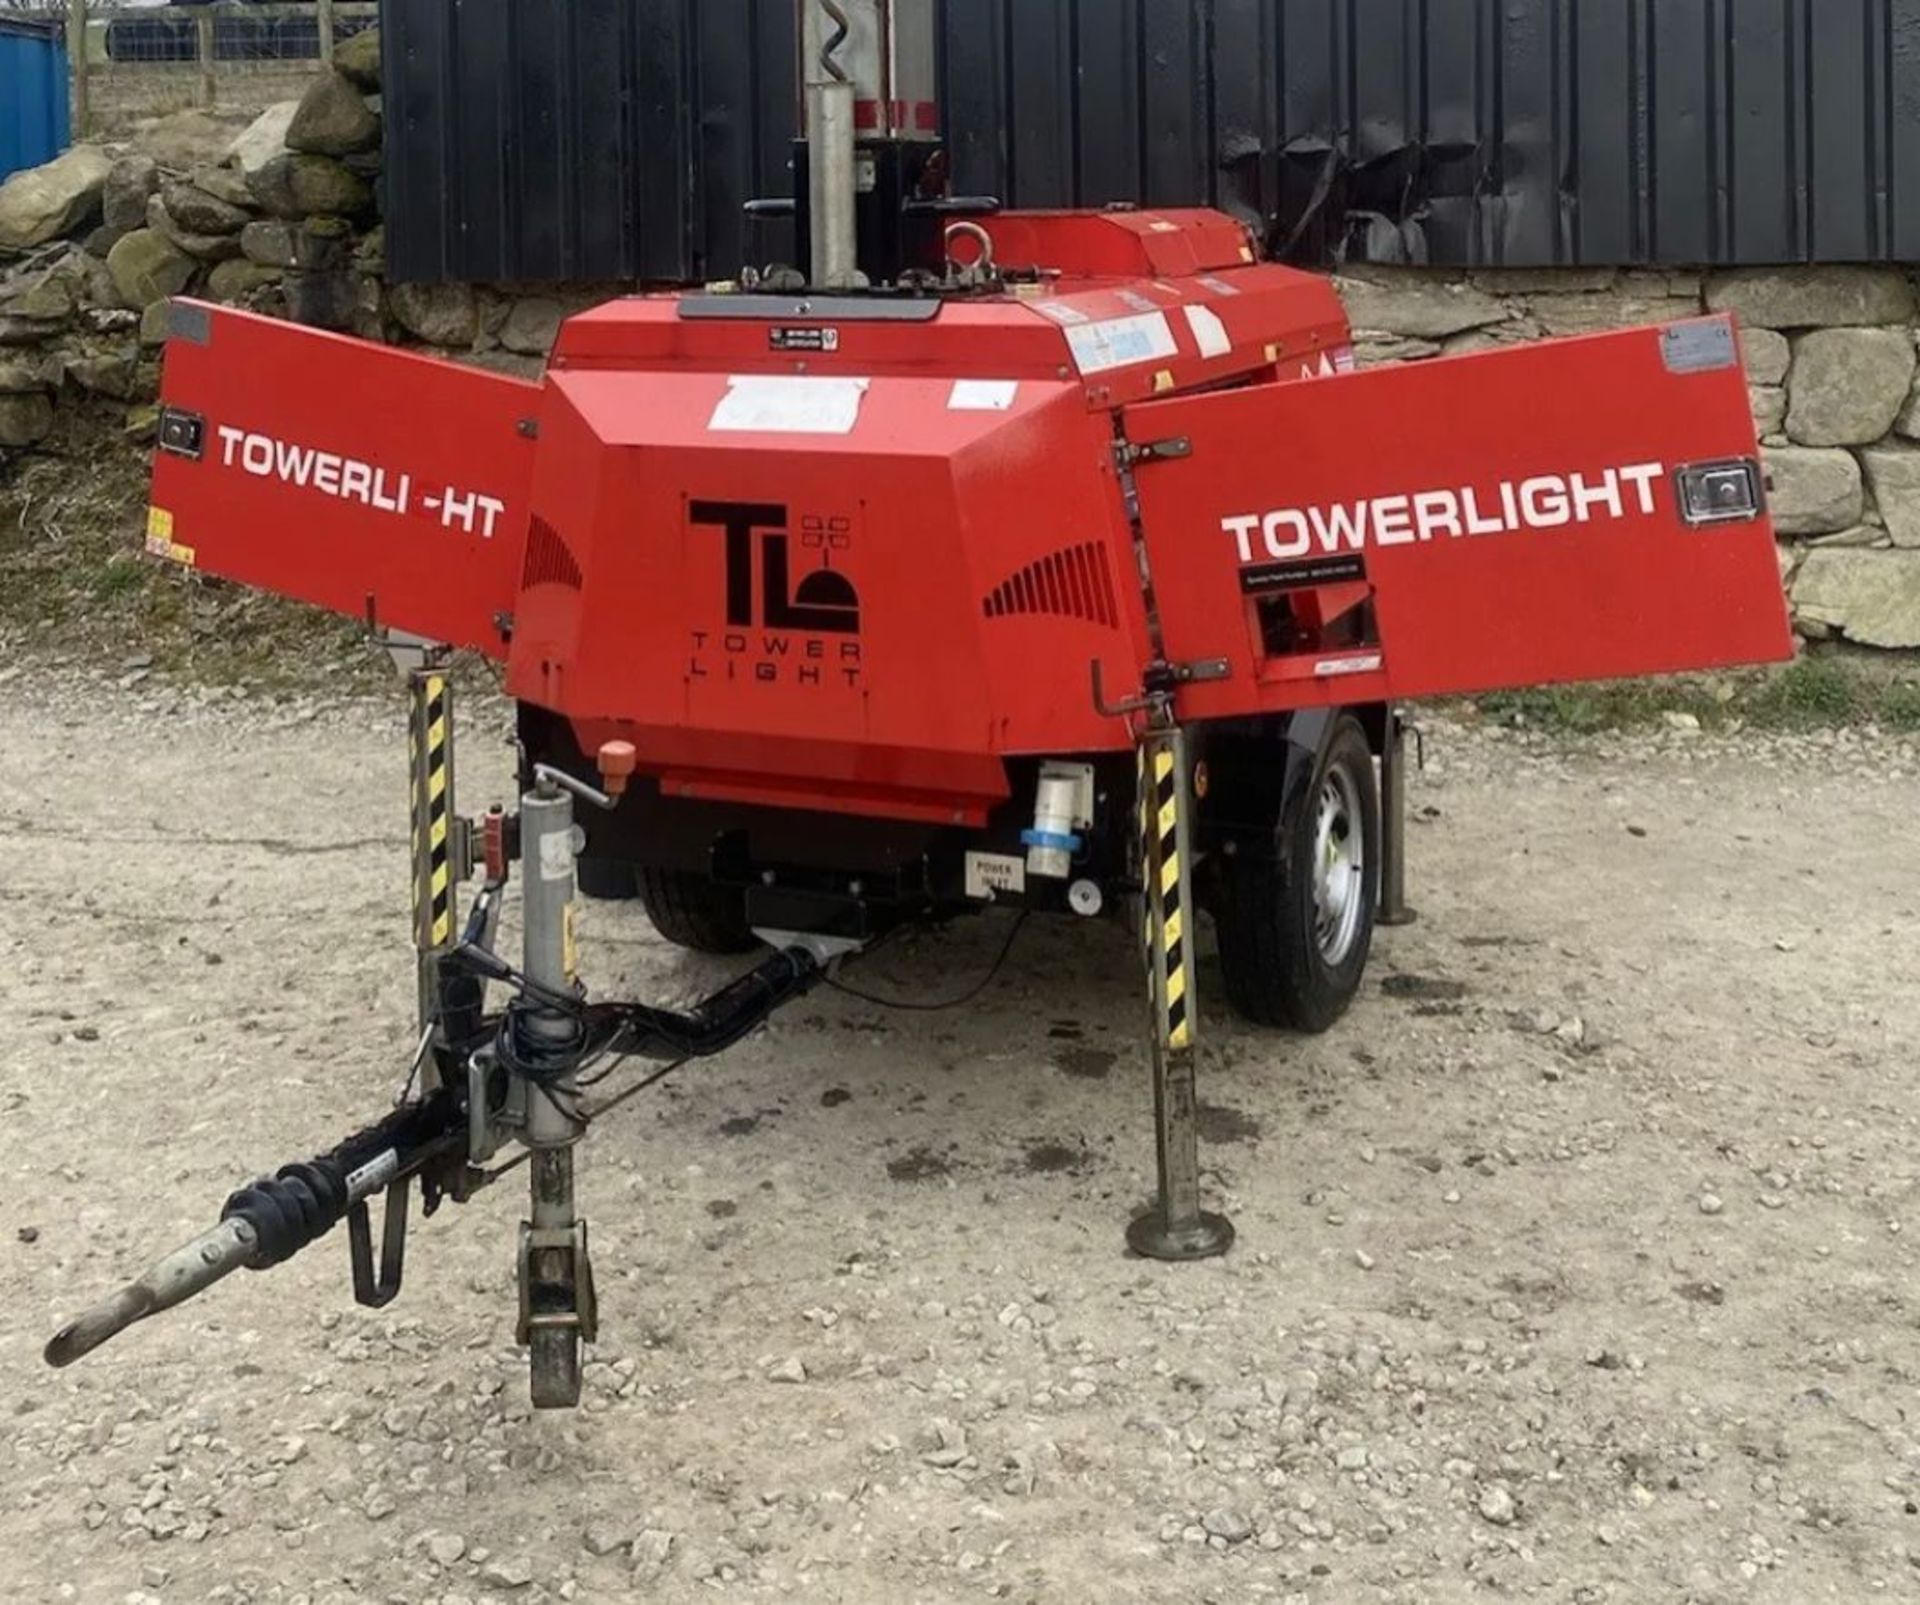 2014 TOWERLIGHT LED BLED1 - 1557 FAST TOW GENERATOR DIESEL - Image 2 of 9